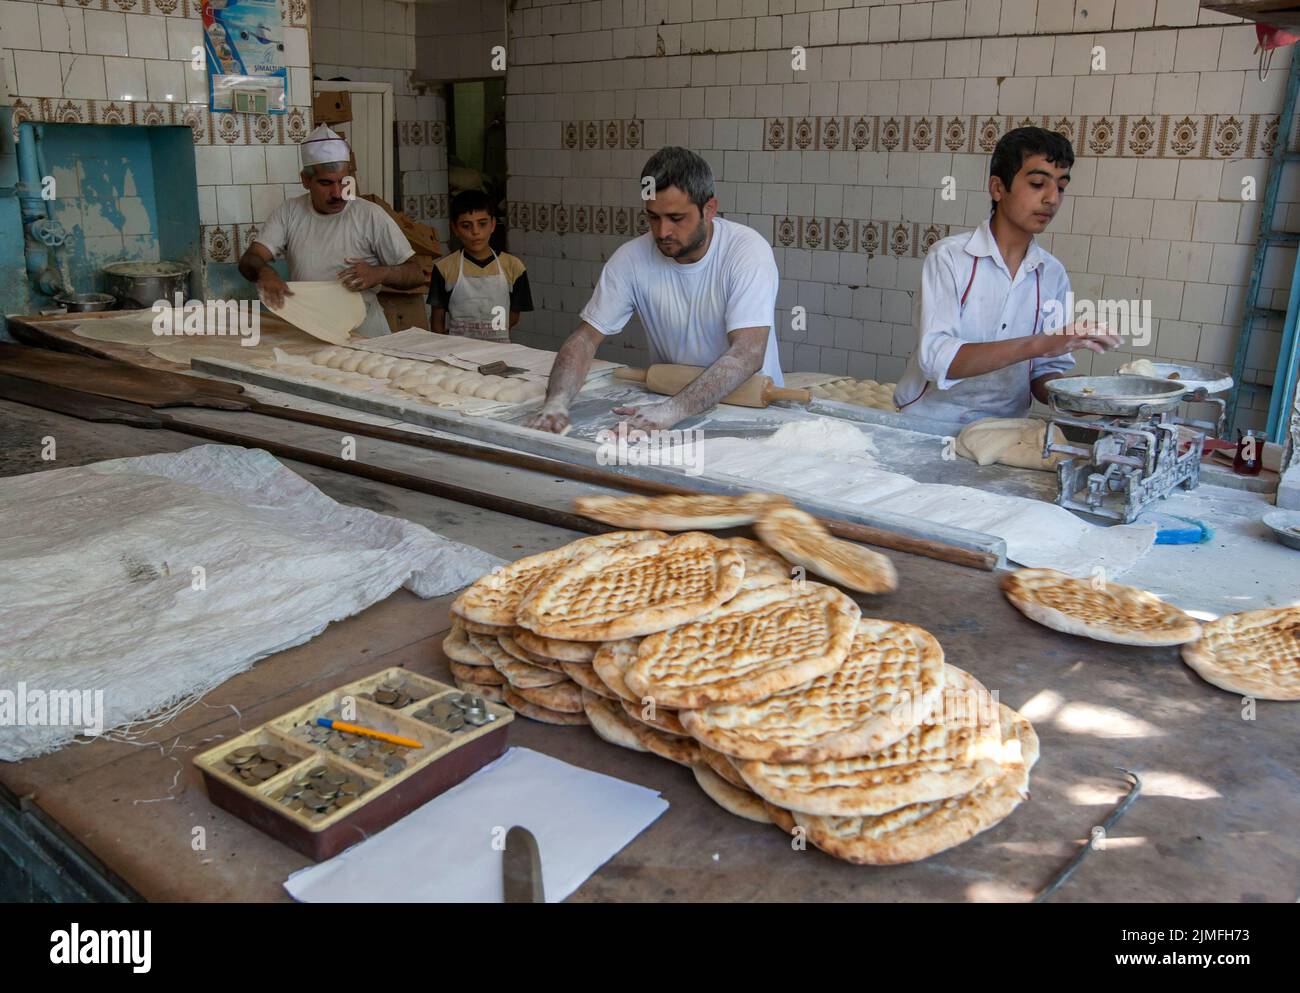 Men and boys busy at work making Turkish flat bread in a bakery in Sanliurfa in eastern Turkey. Bread is the staple of the Turkish diet. Stock Photo